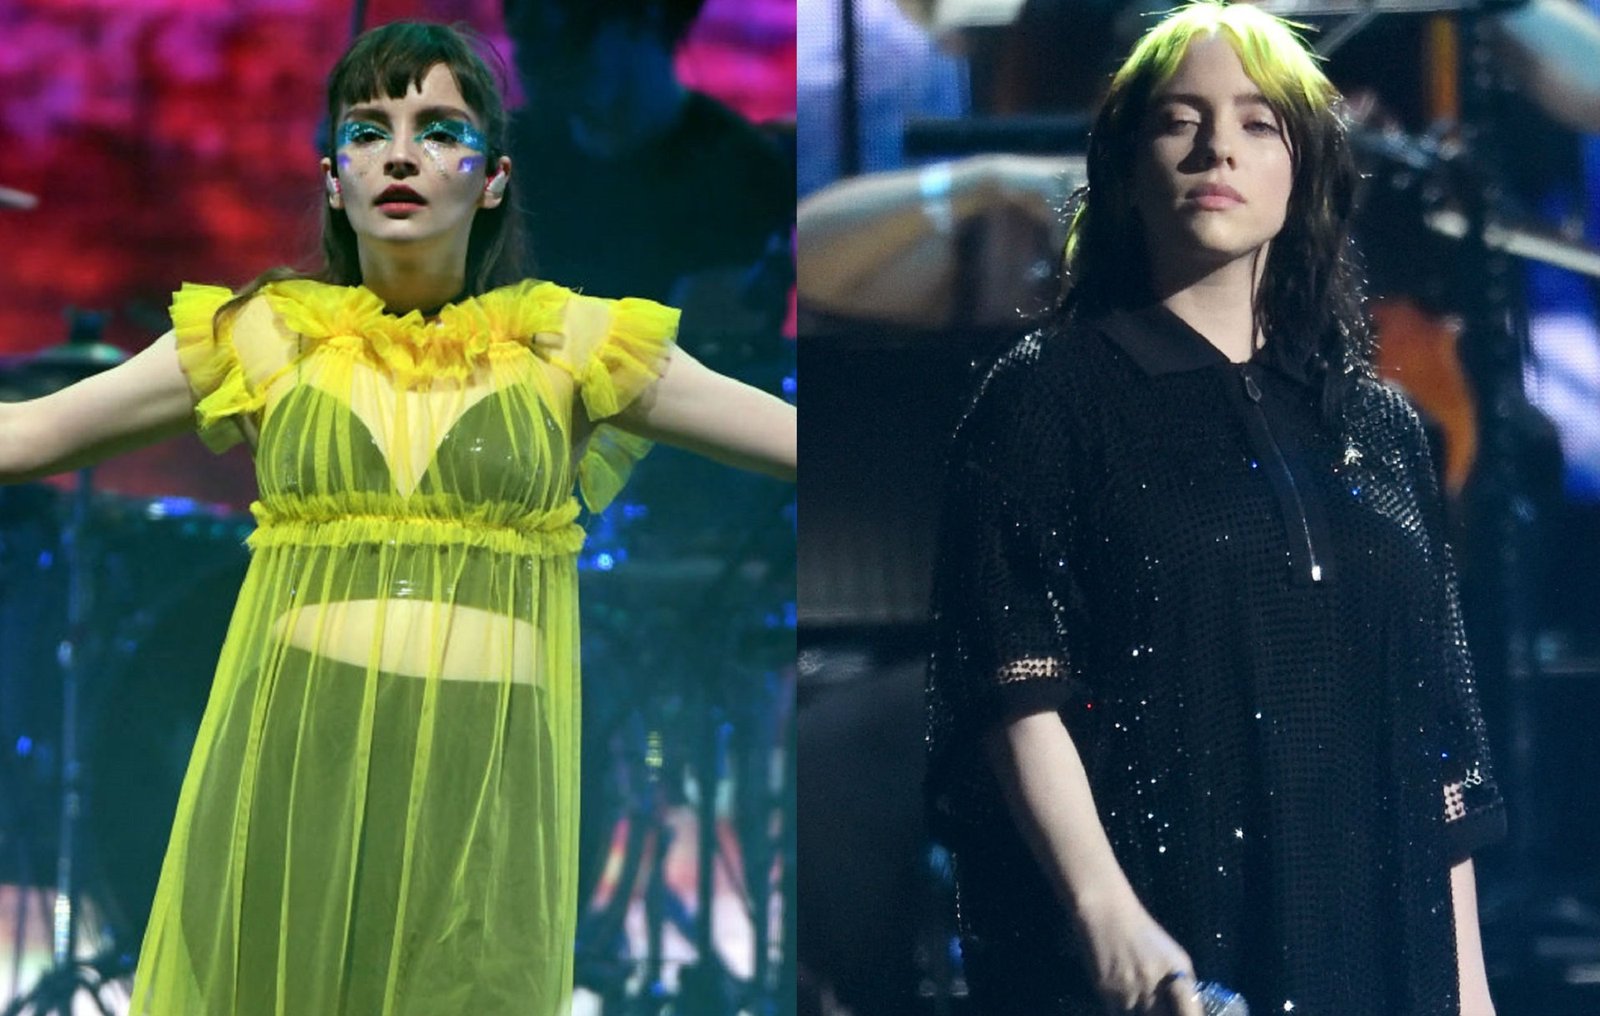 Chvrches frontwoman Lauren Mayberry says the band “learnt something” from Billie Eilish’s debut album